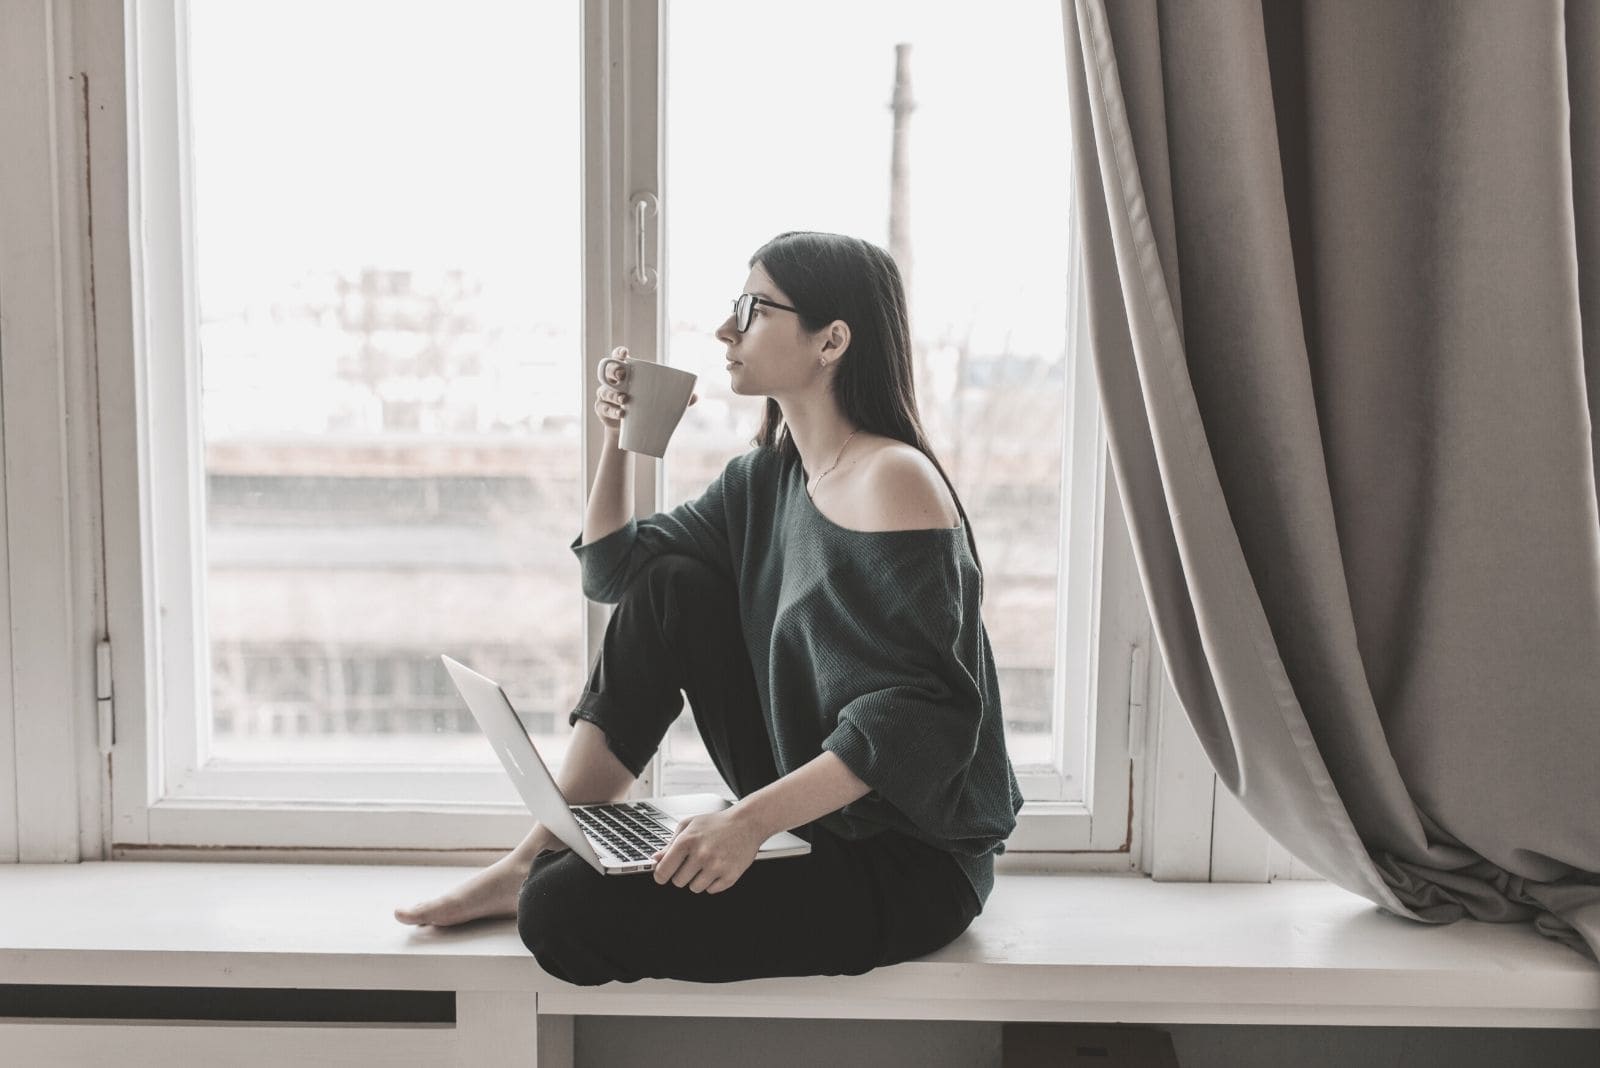 young woman thinking drinking coffee sitting by the window sill with a laptop on her lap